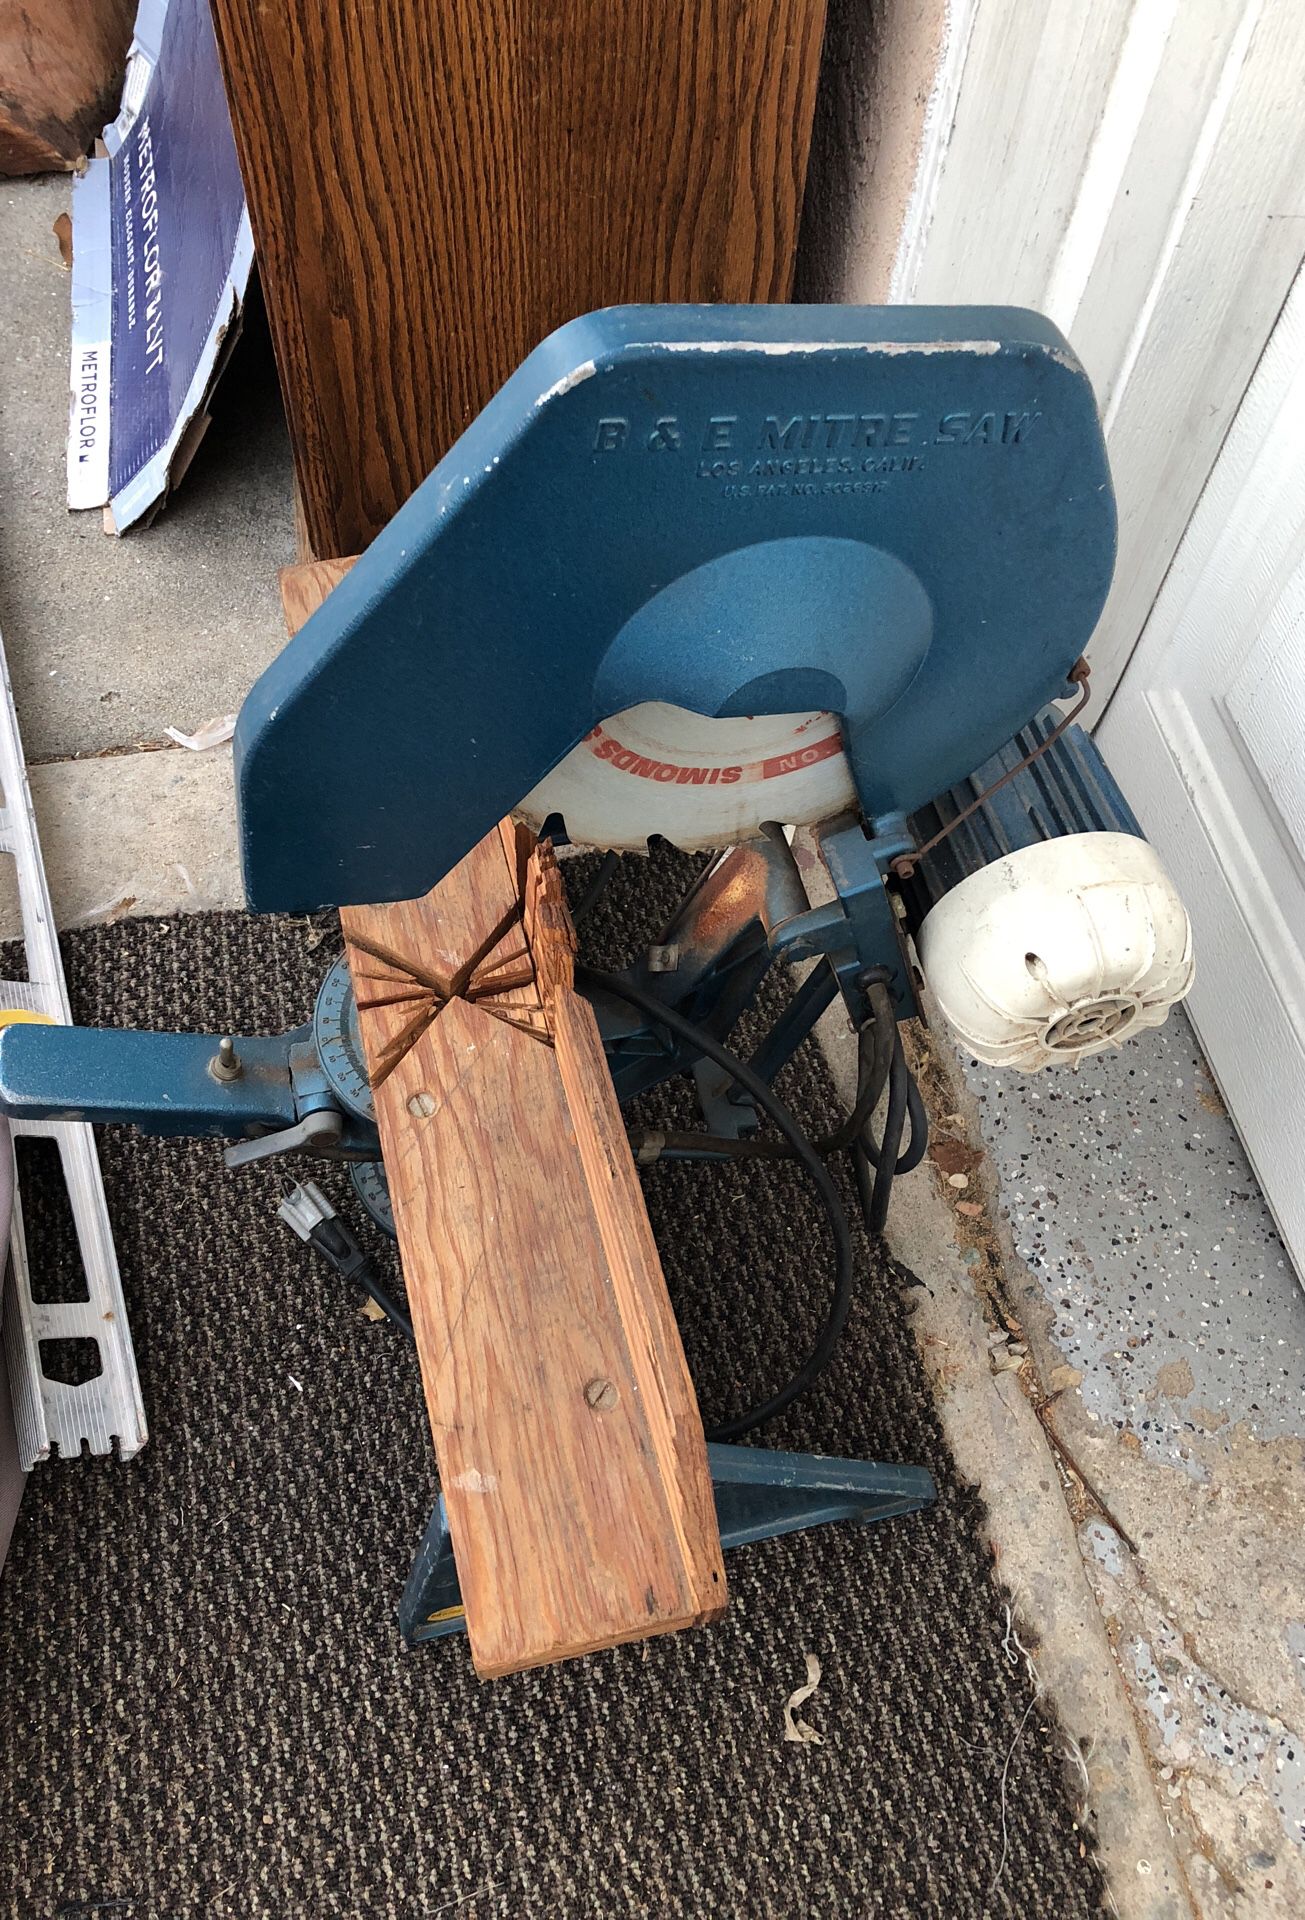 Vintage 60 S Very Rare B E Electric Belted Miter Saw Collector S Item For Sale In Long Beach Ca Offerup